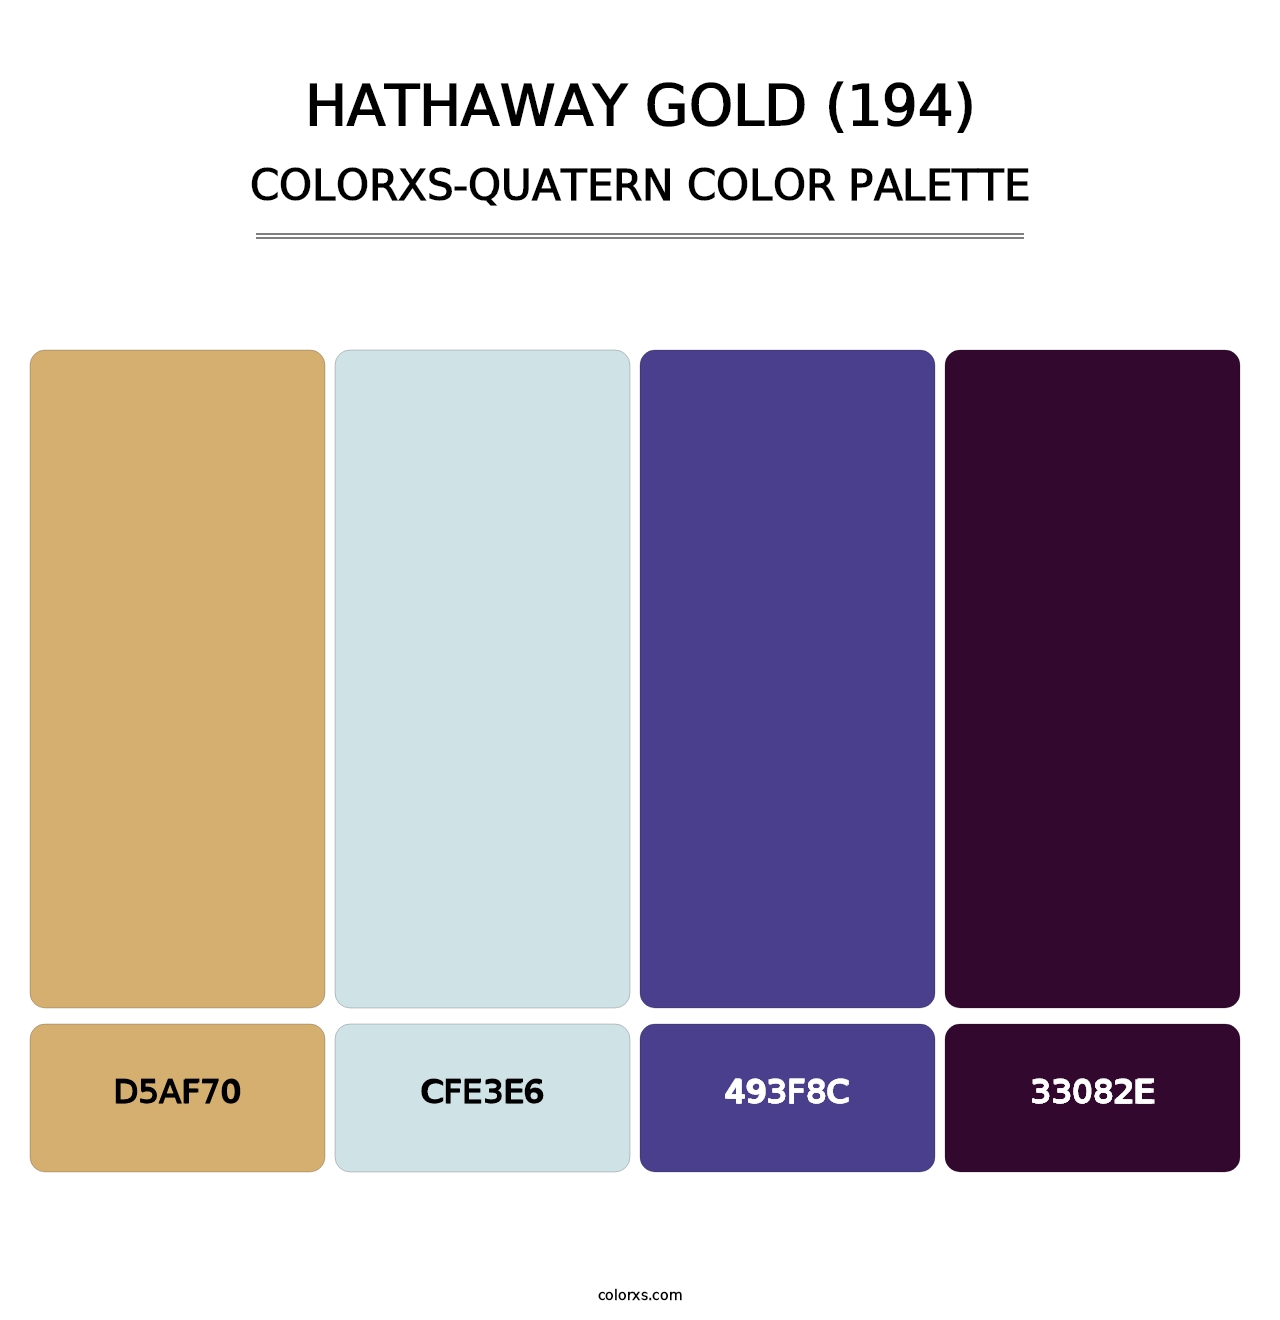 Hathaway Gold (194) - Colorxs Quatern Palette